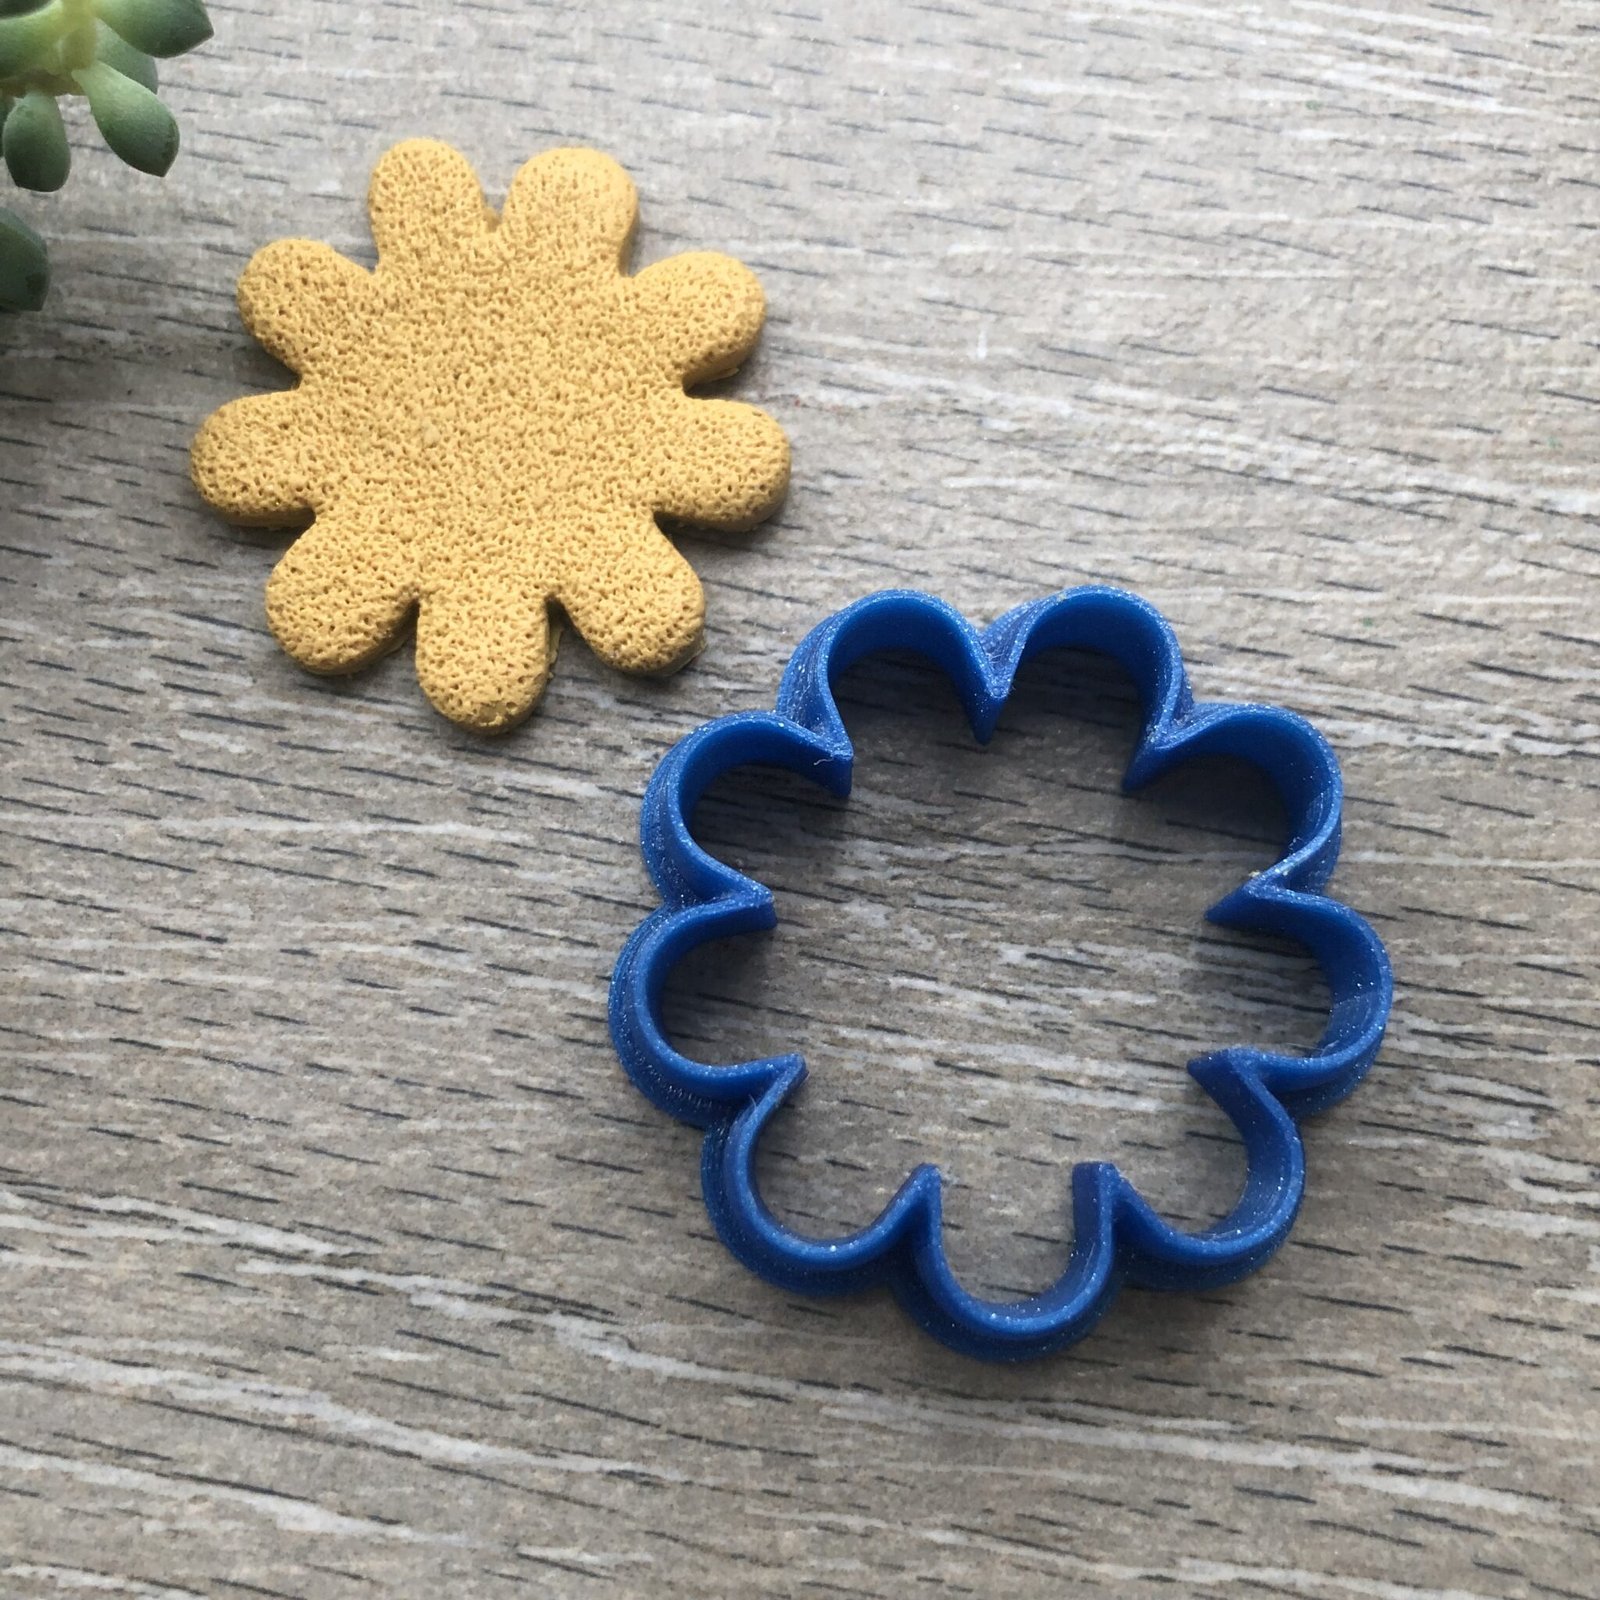 Polymer Clay Cutter Set Daisy, Polymer Clay Accessories, Clay Cutter 